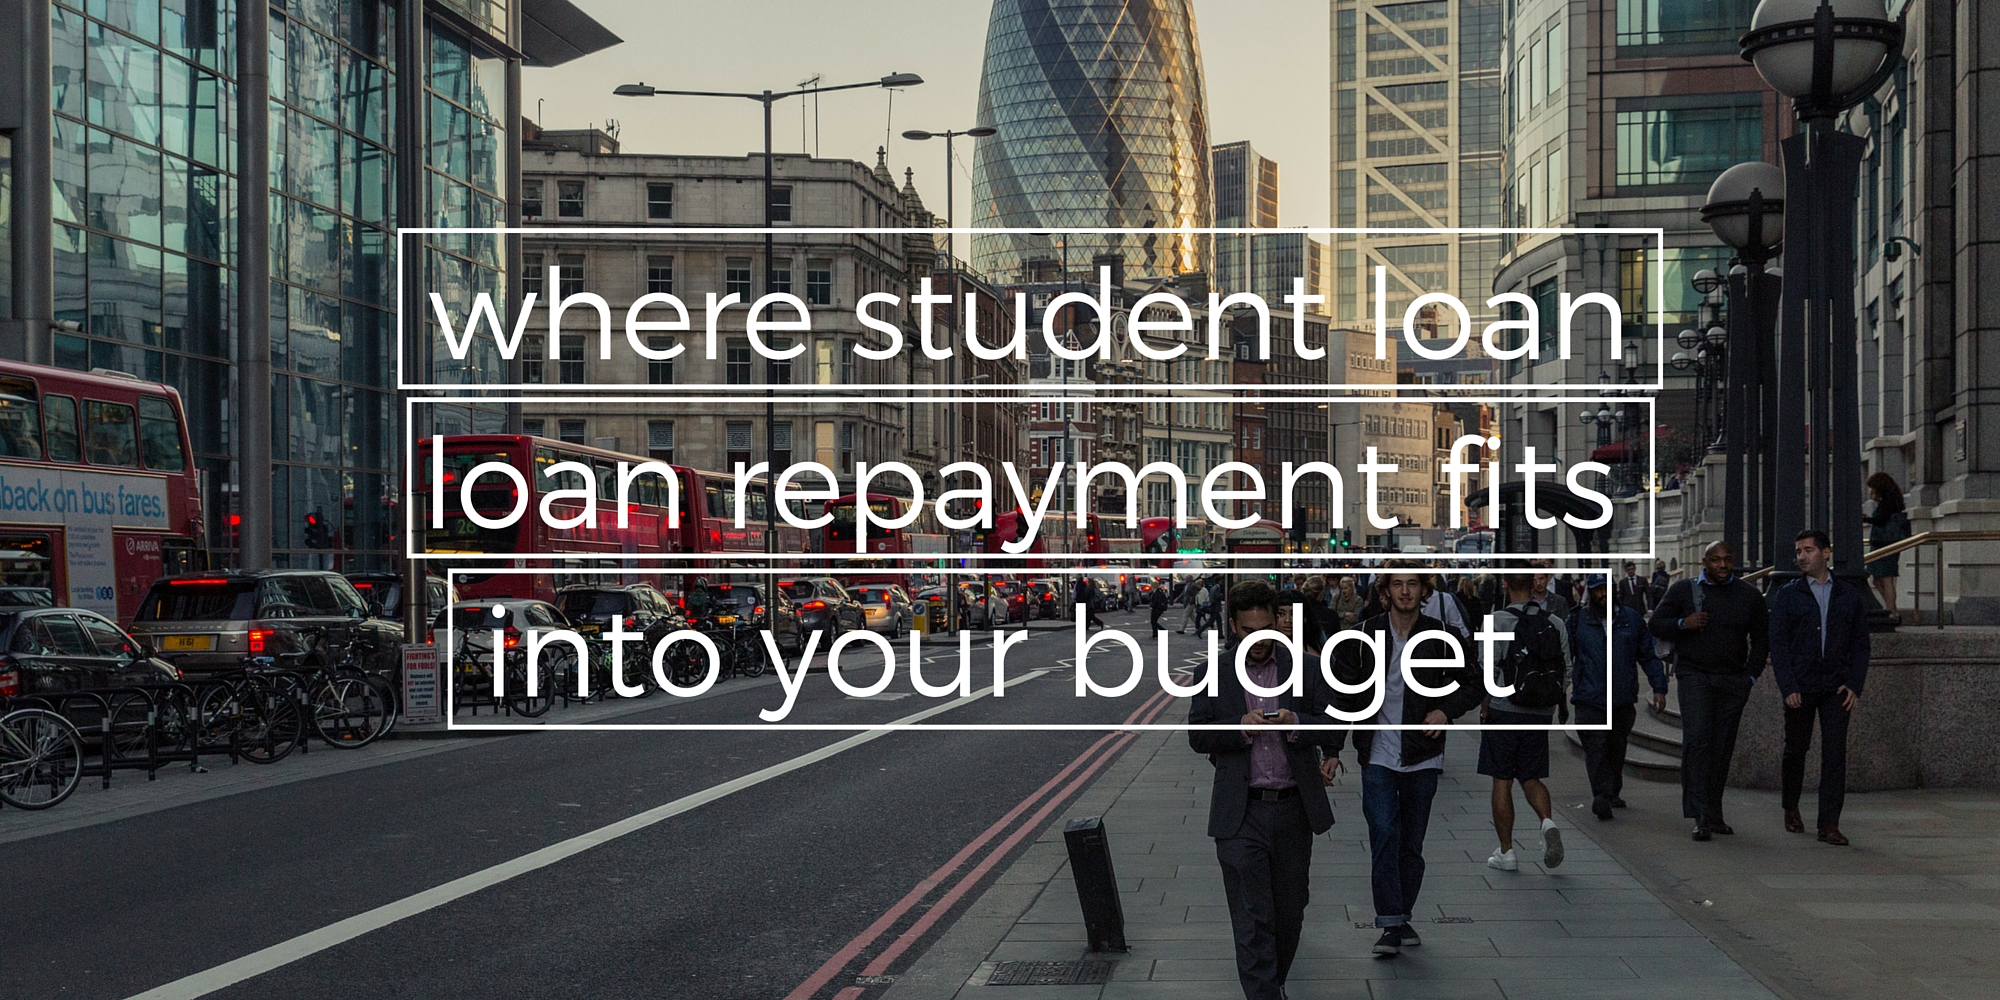 where student loan repayment fits into your budget